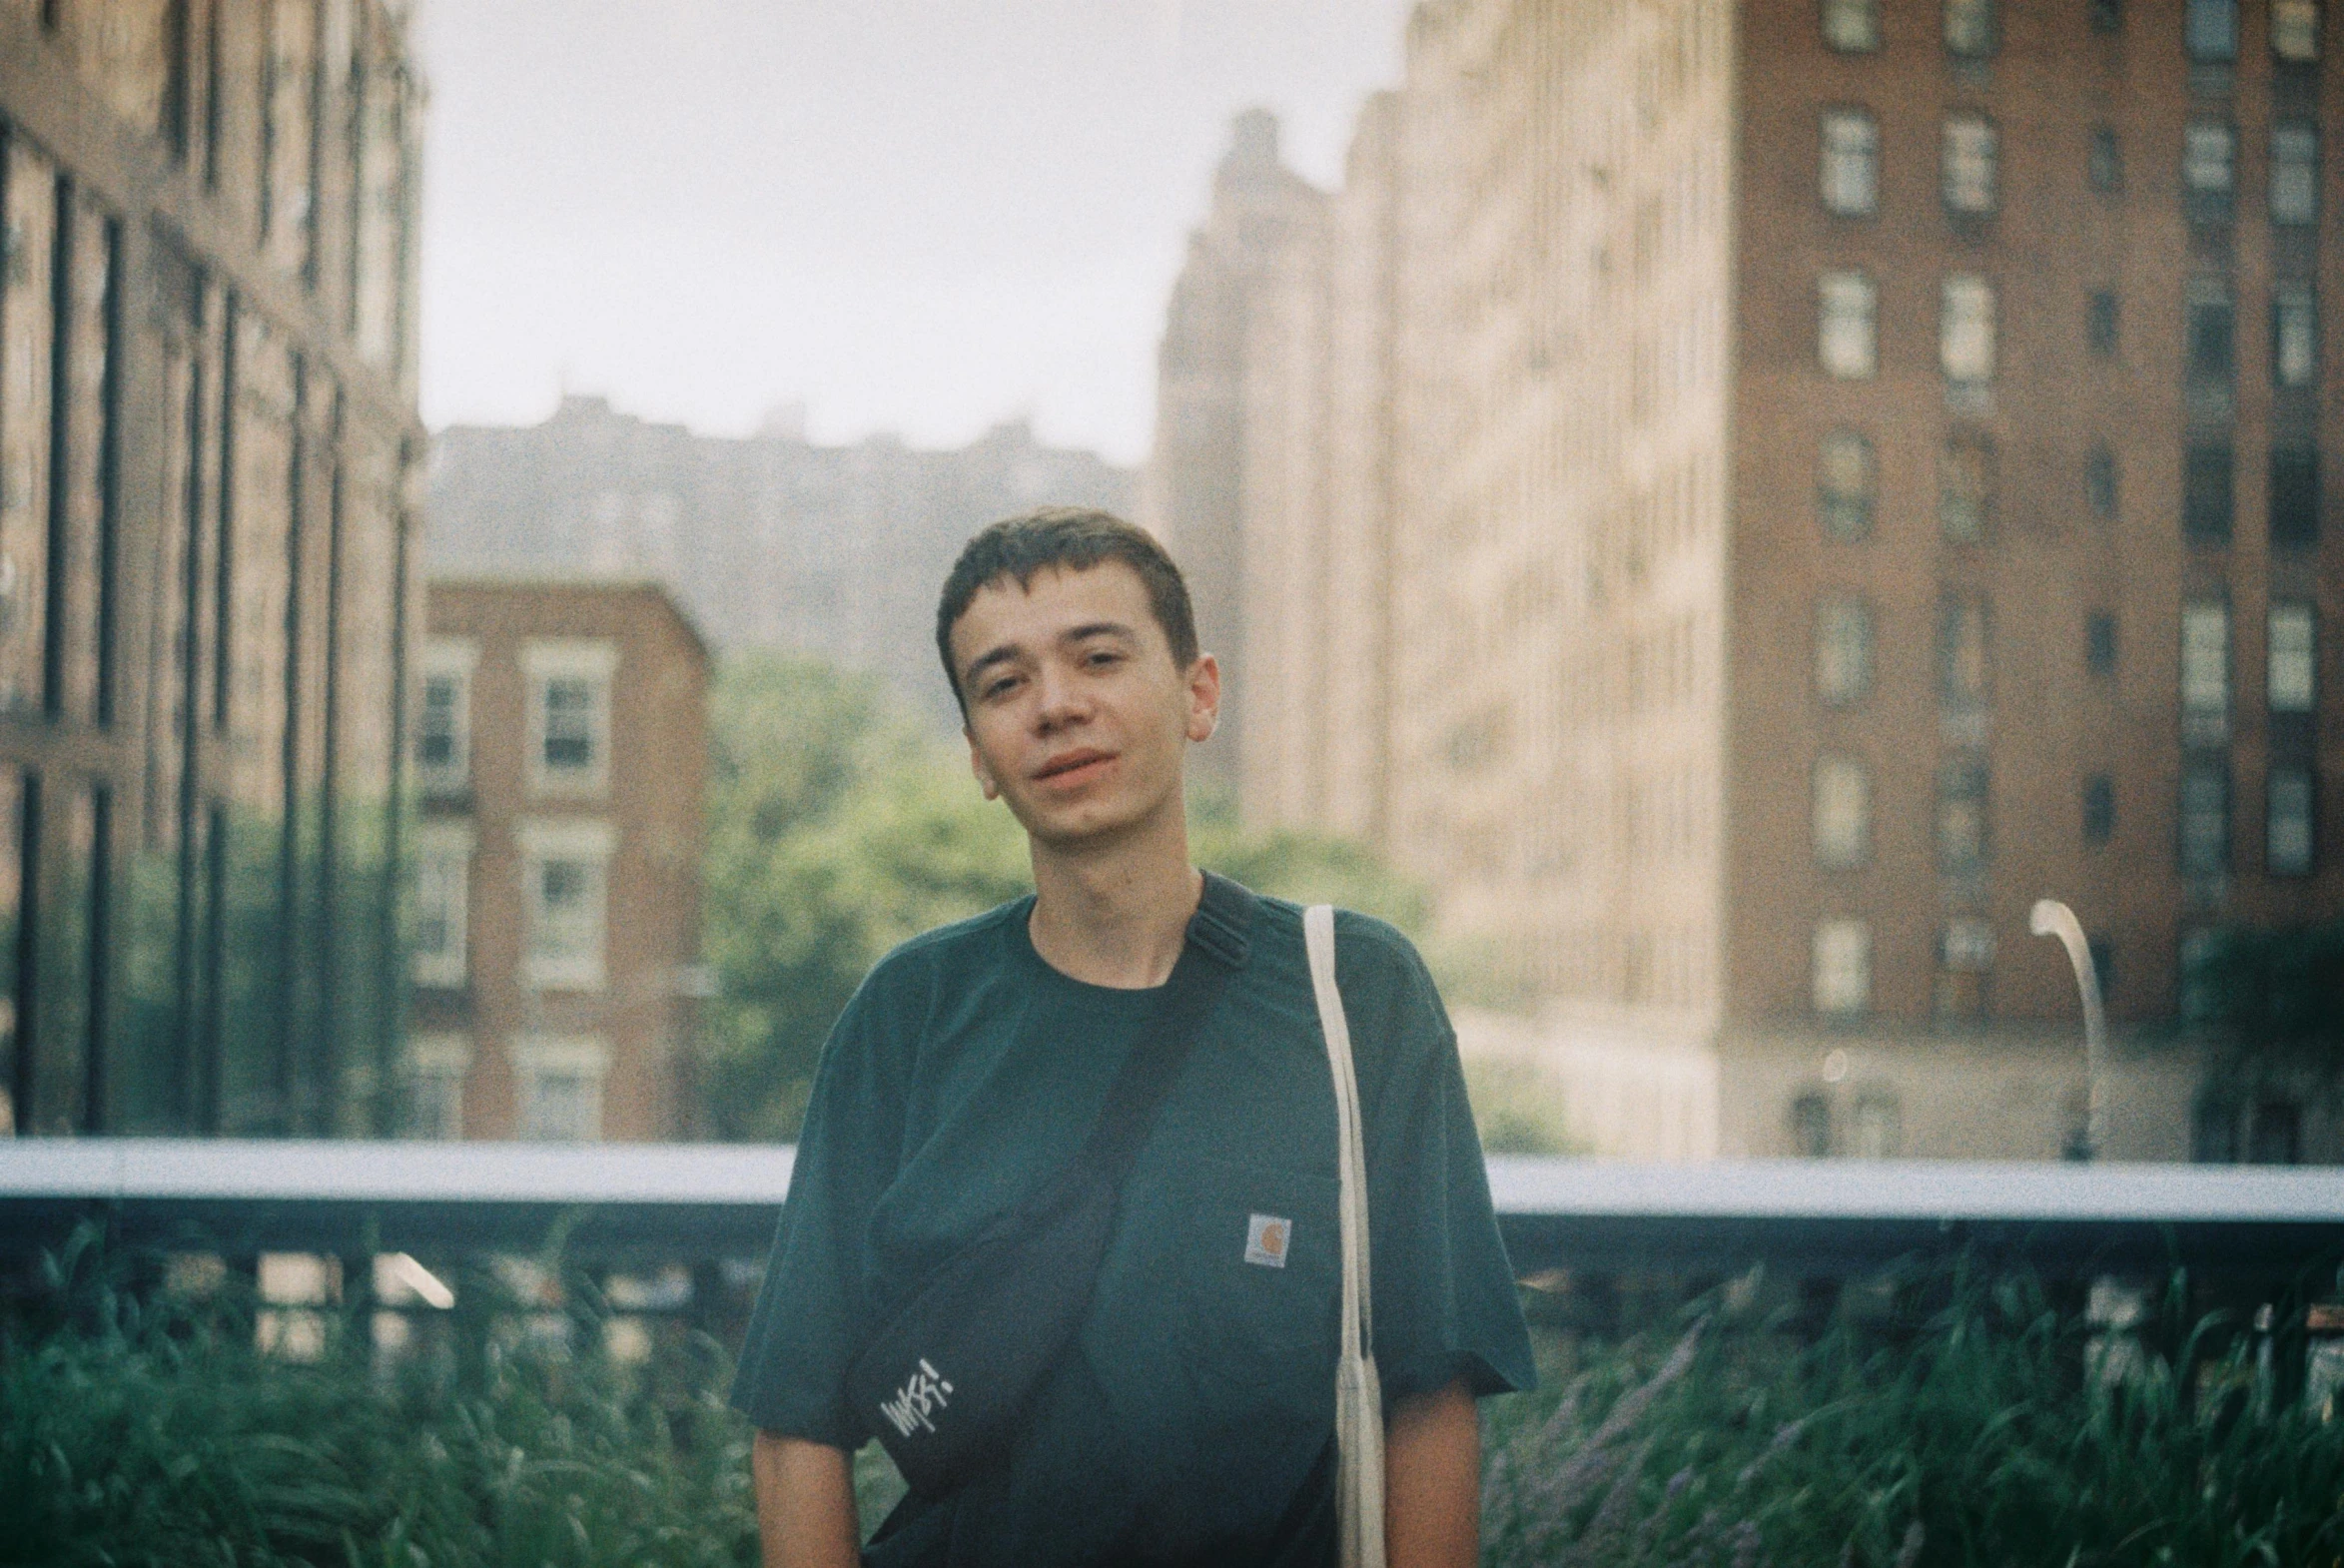 a man standing in front of tall buildings, an album cover, unsplash, realism, portrait of 1 5 - year - old boy, rex orange county, halfbody headshot, taken on a 2000s camera